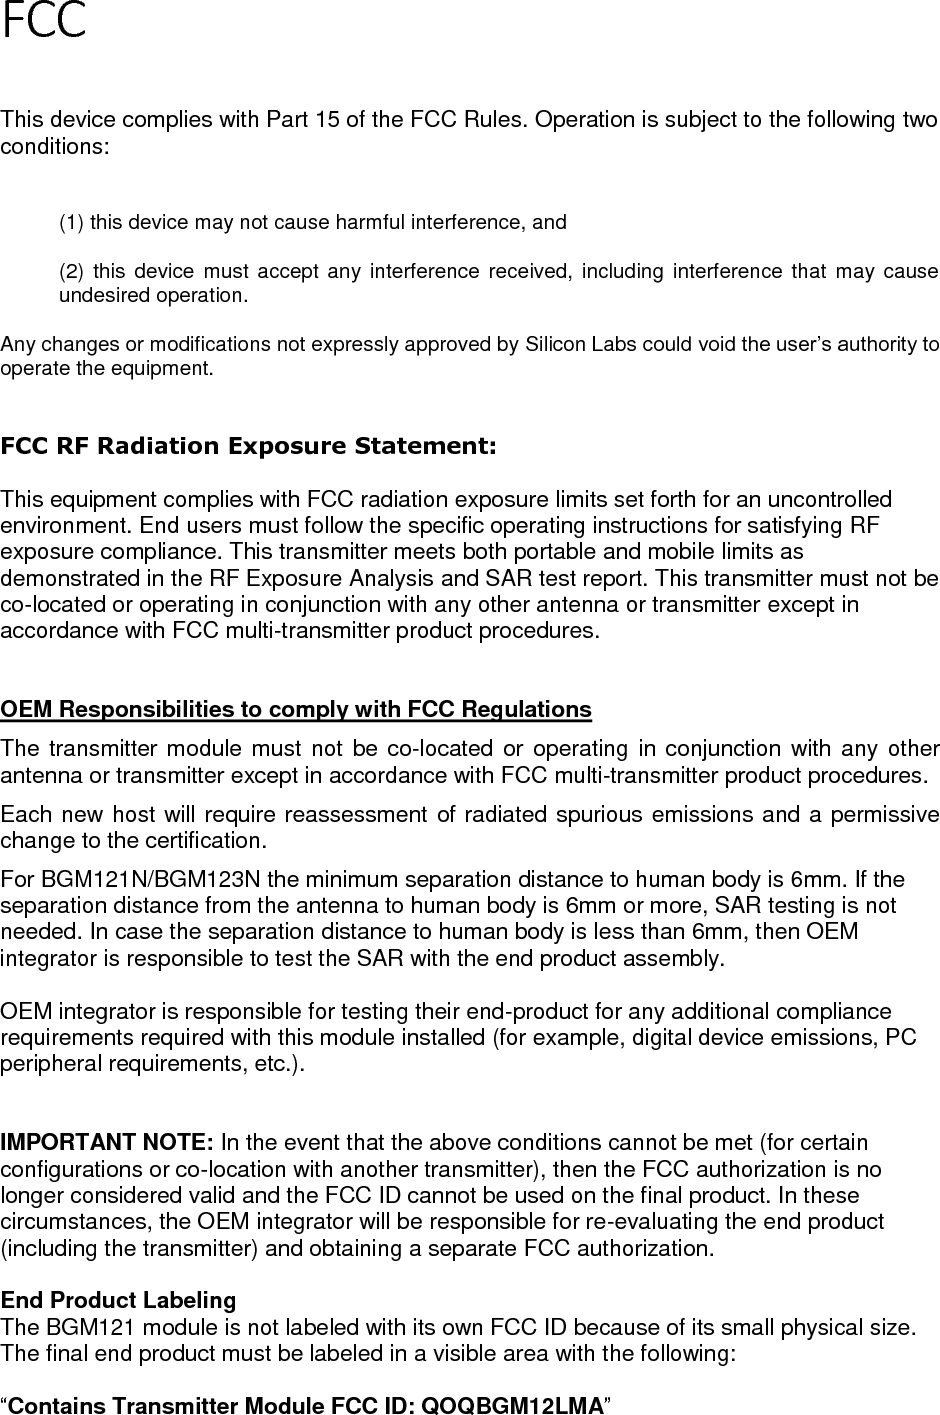 Page 5 of 7 or  “Contains FCC ID: QOQBGM12LMA  The OEM integrator has to be aware not to provide information to the end user regarding how to install or remove this RF module or change RF related parameters in the user manual of the end product.    